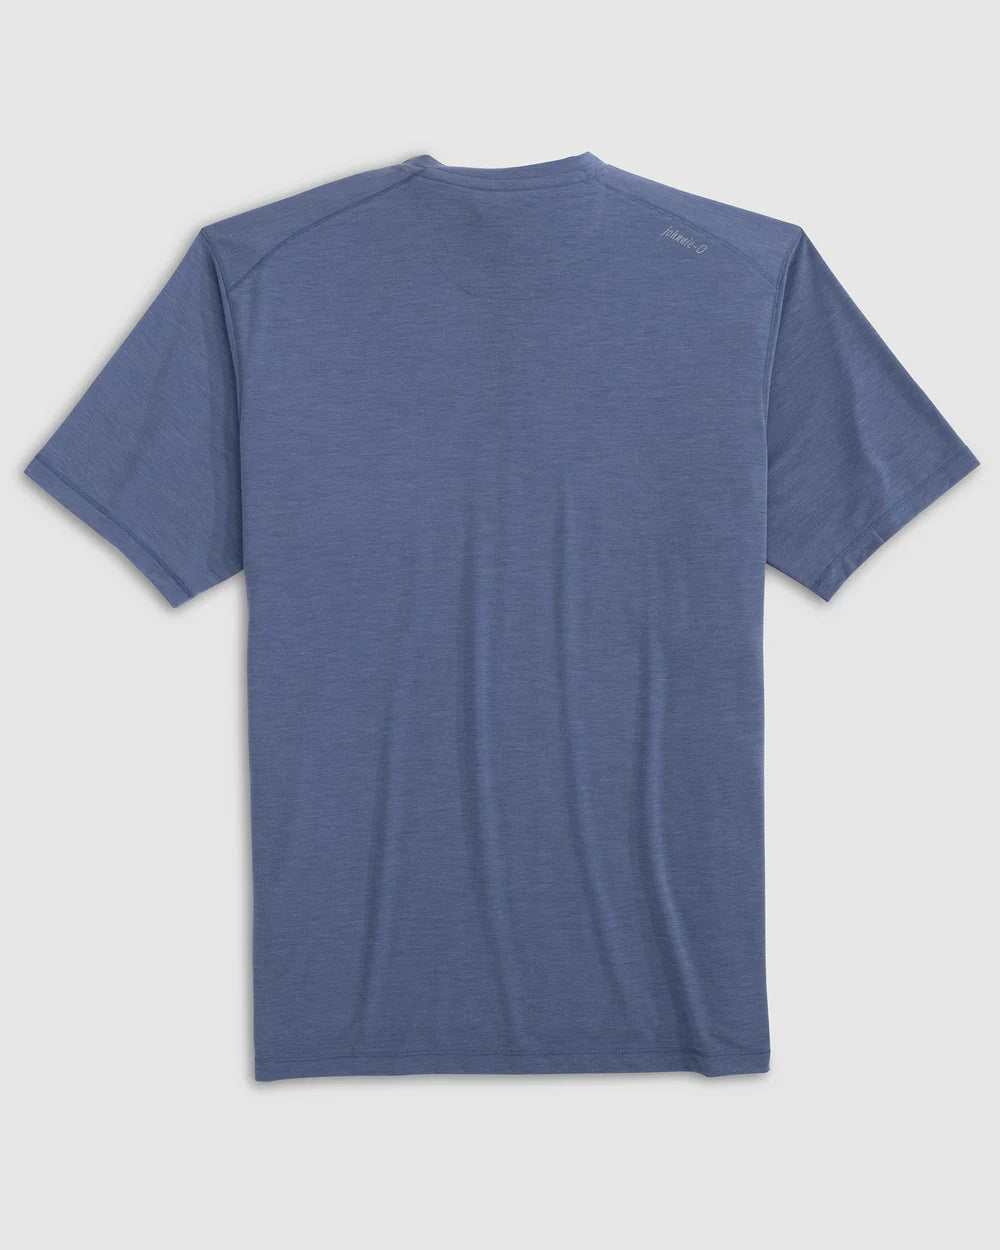 The Course Performance T-Shirt in Off Shore